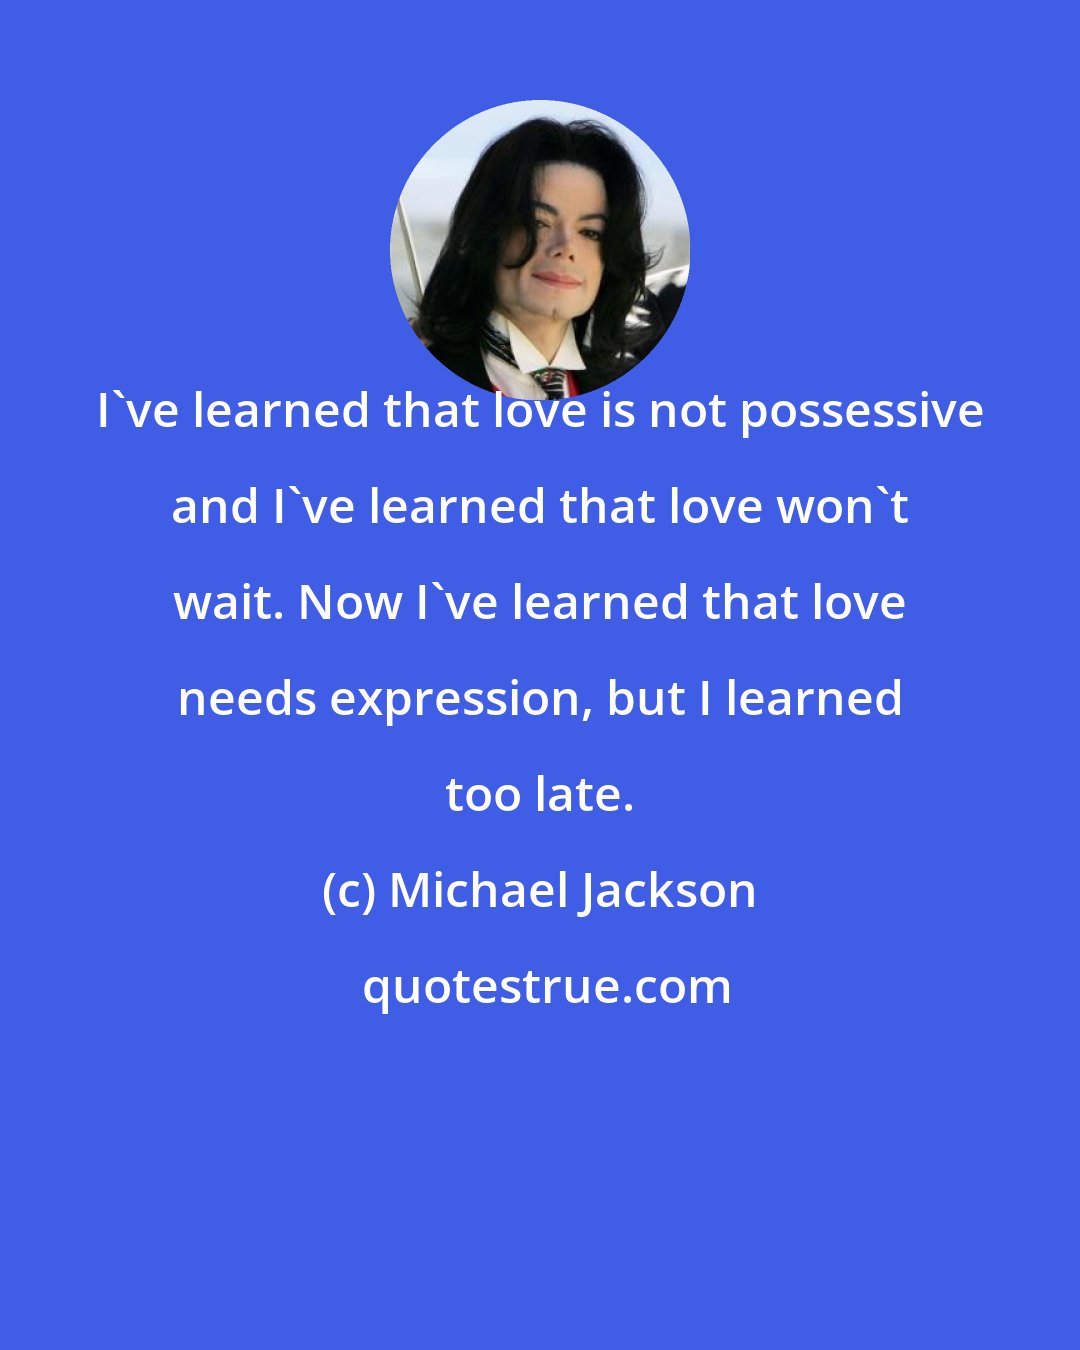 Michael Jackson: I've learned that love is not possessive and I've learned that love won't wait. Now I've learned that love needs expression, but I learned too late.